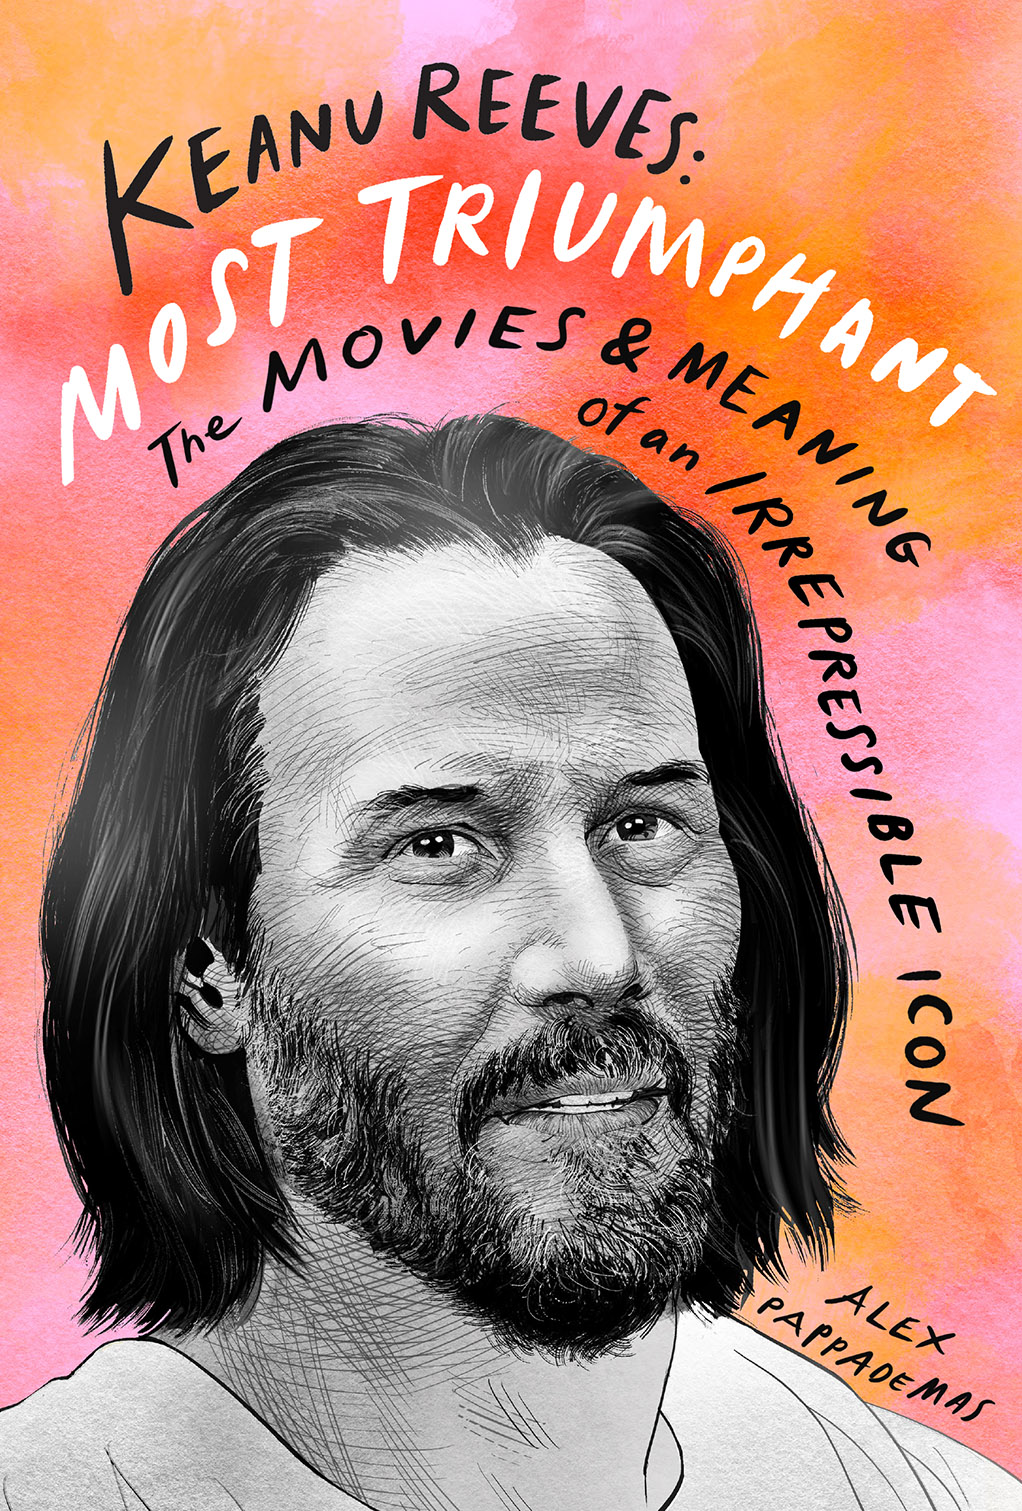 Keanu Reeves: Most Triumphant - The Movies & Meaning of an Irrepressible Icon